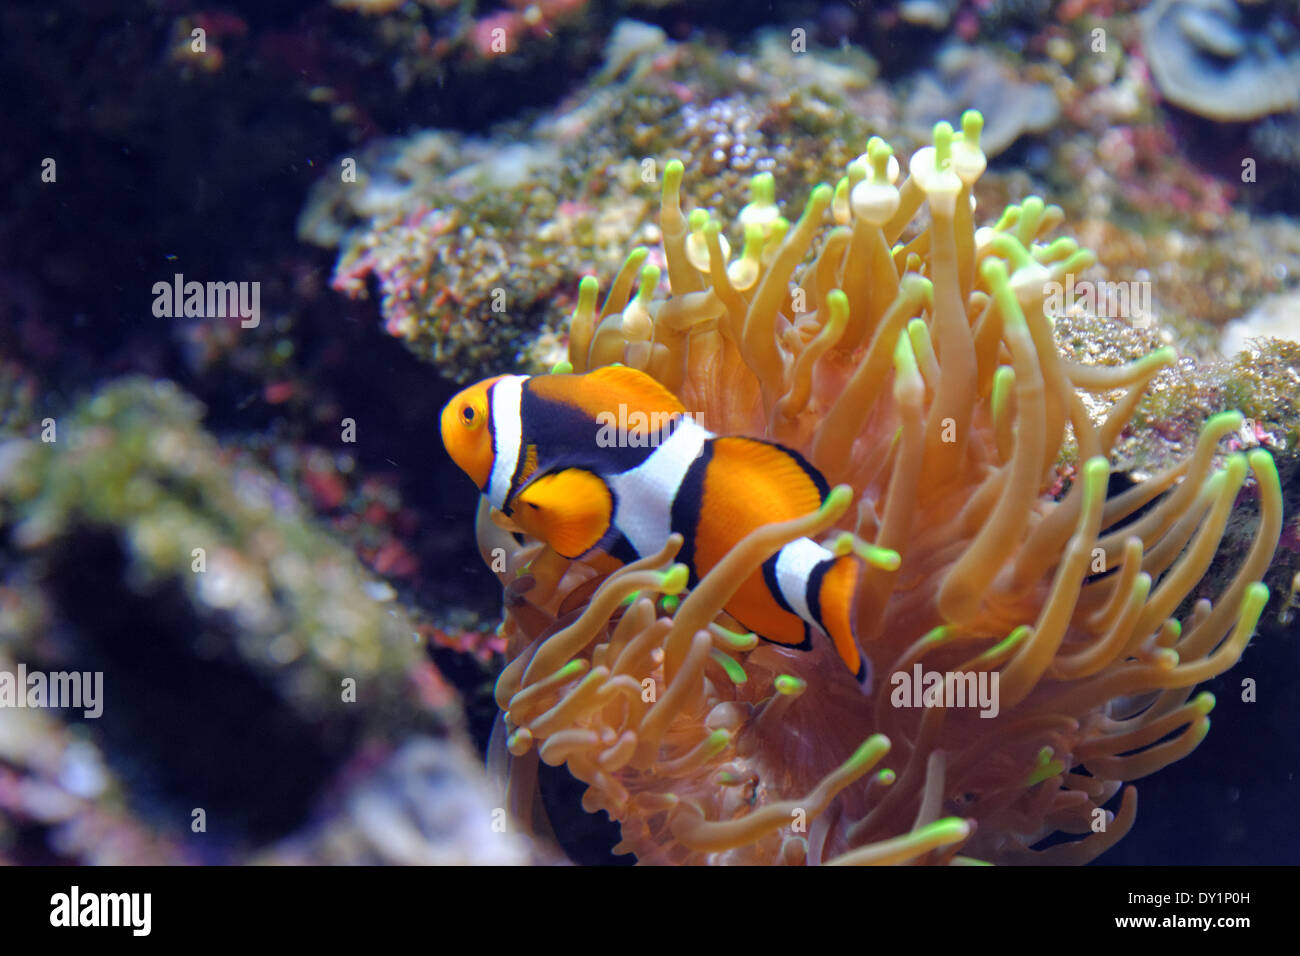 Orange clownfish (Amphiprion percula) is widely known as a popular aquarium fish. Stock Photo